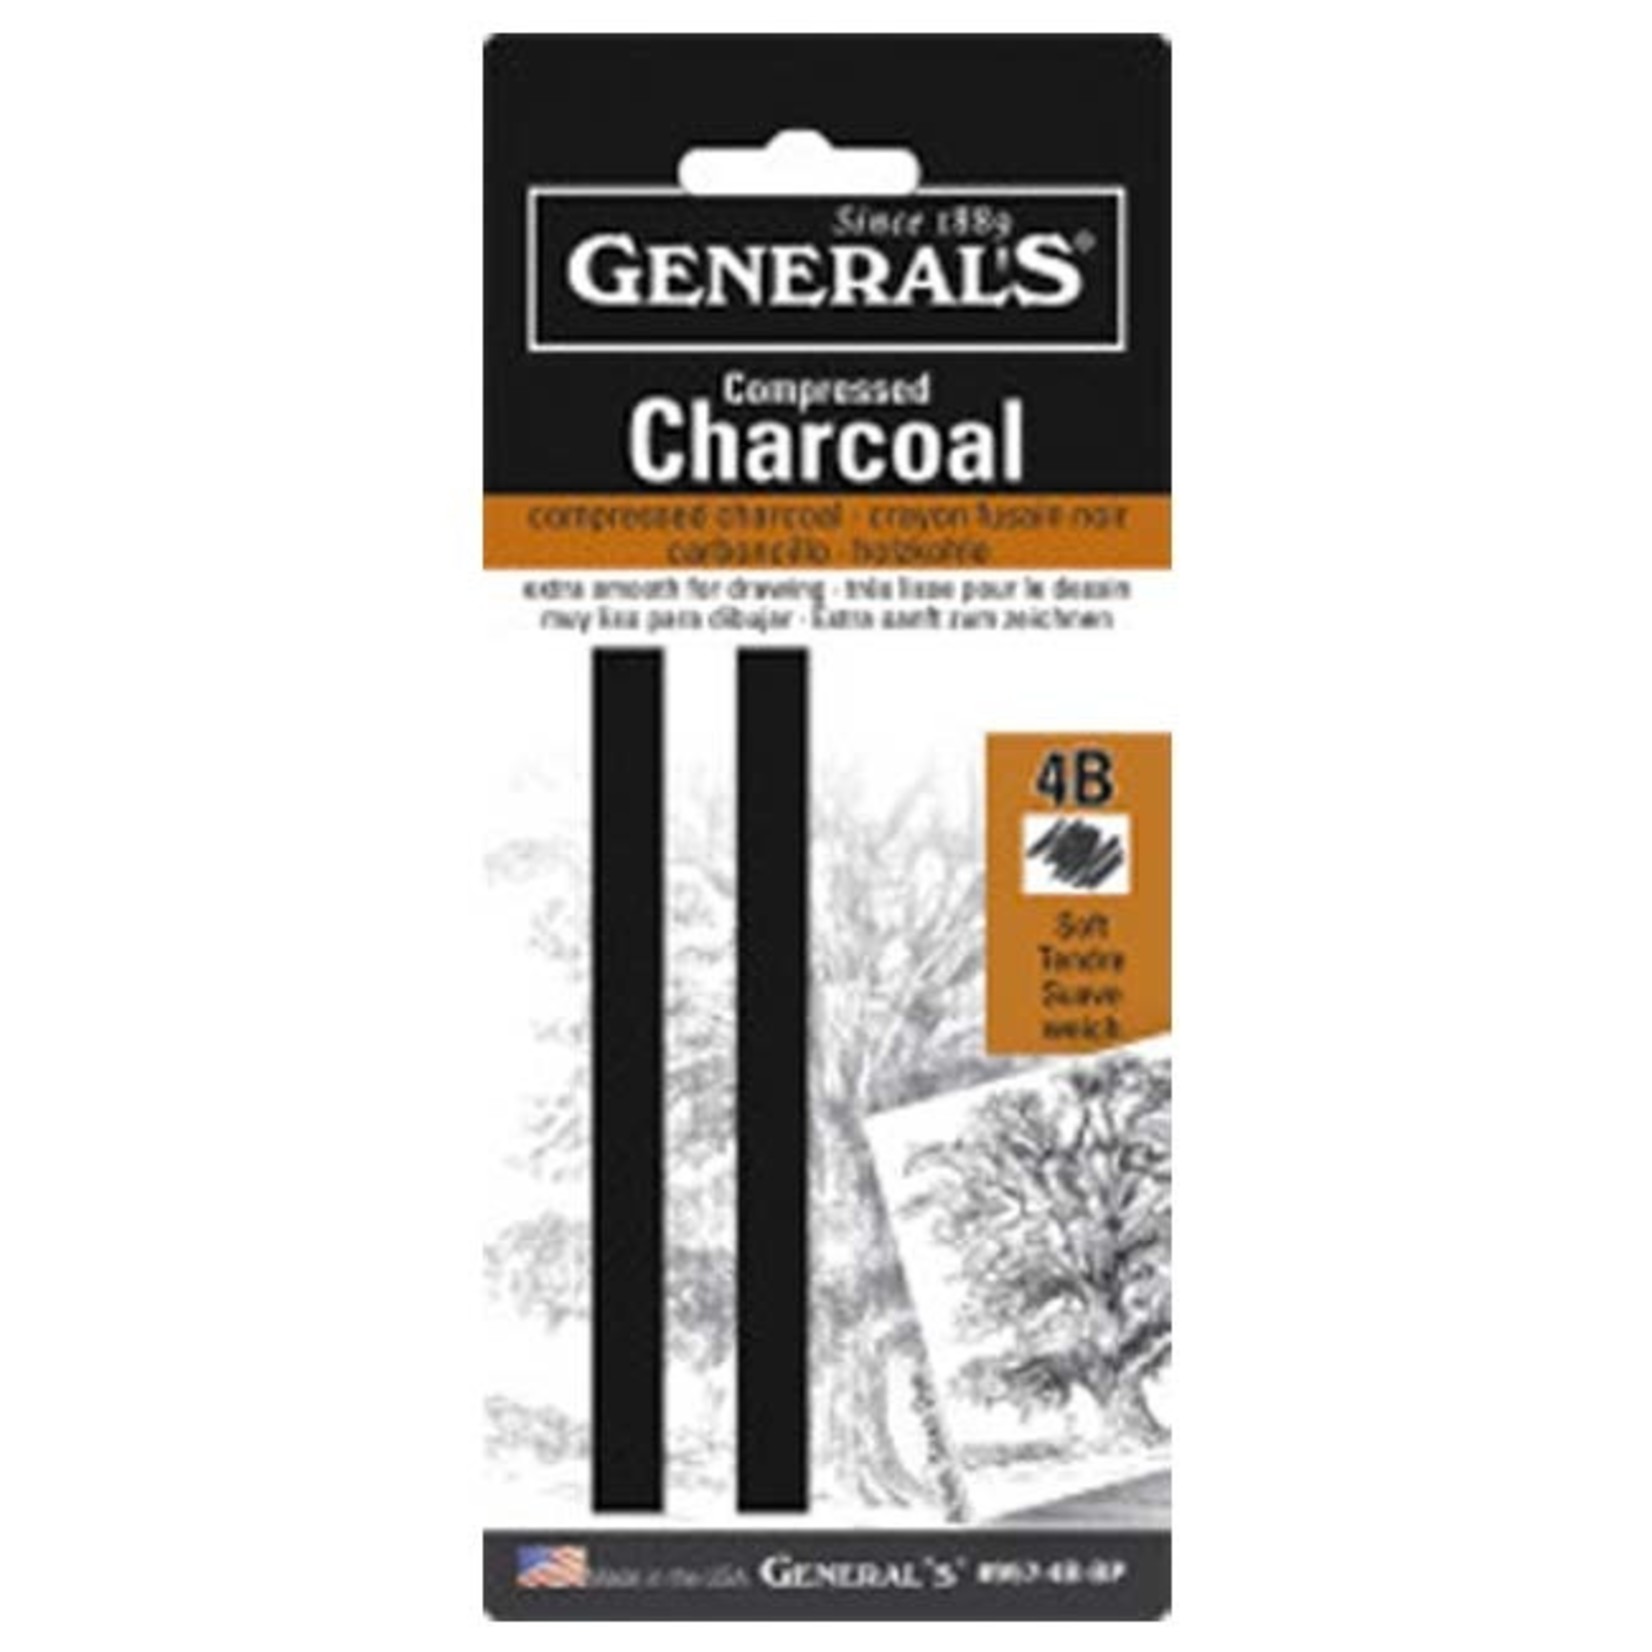 GENERAL'S COMPRESSED CHARCOAL 2/PK 4B